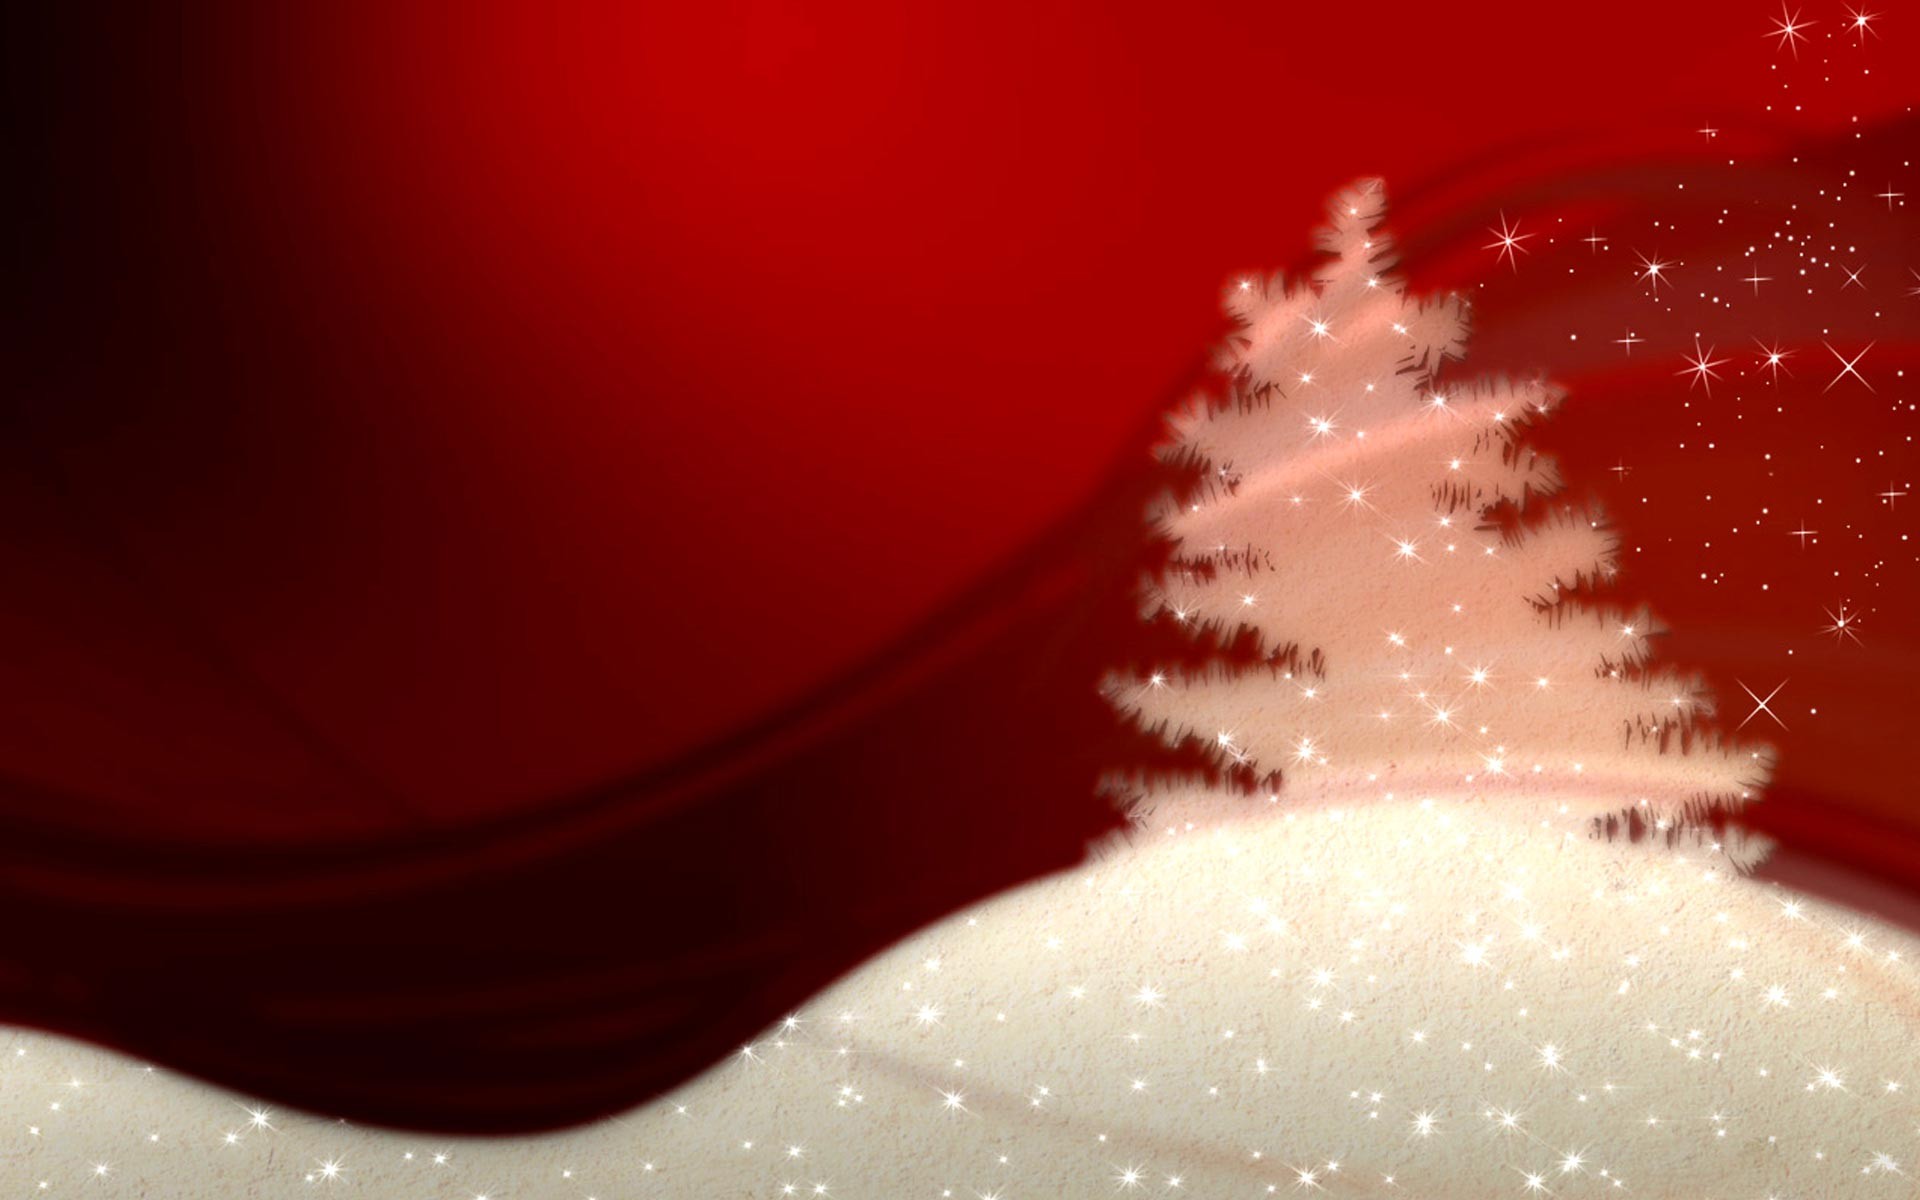 Christmas Tree Wallpaper Widescreen 8825 Hd Wallpapers in Celebrations